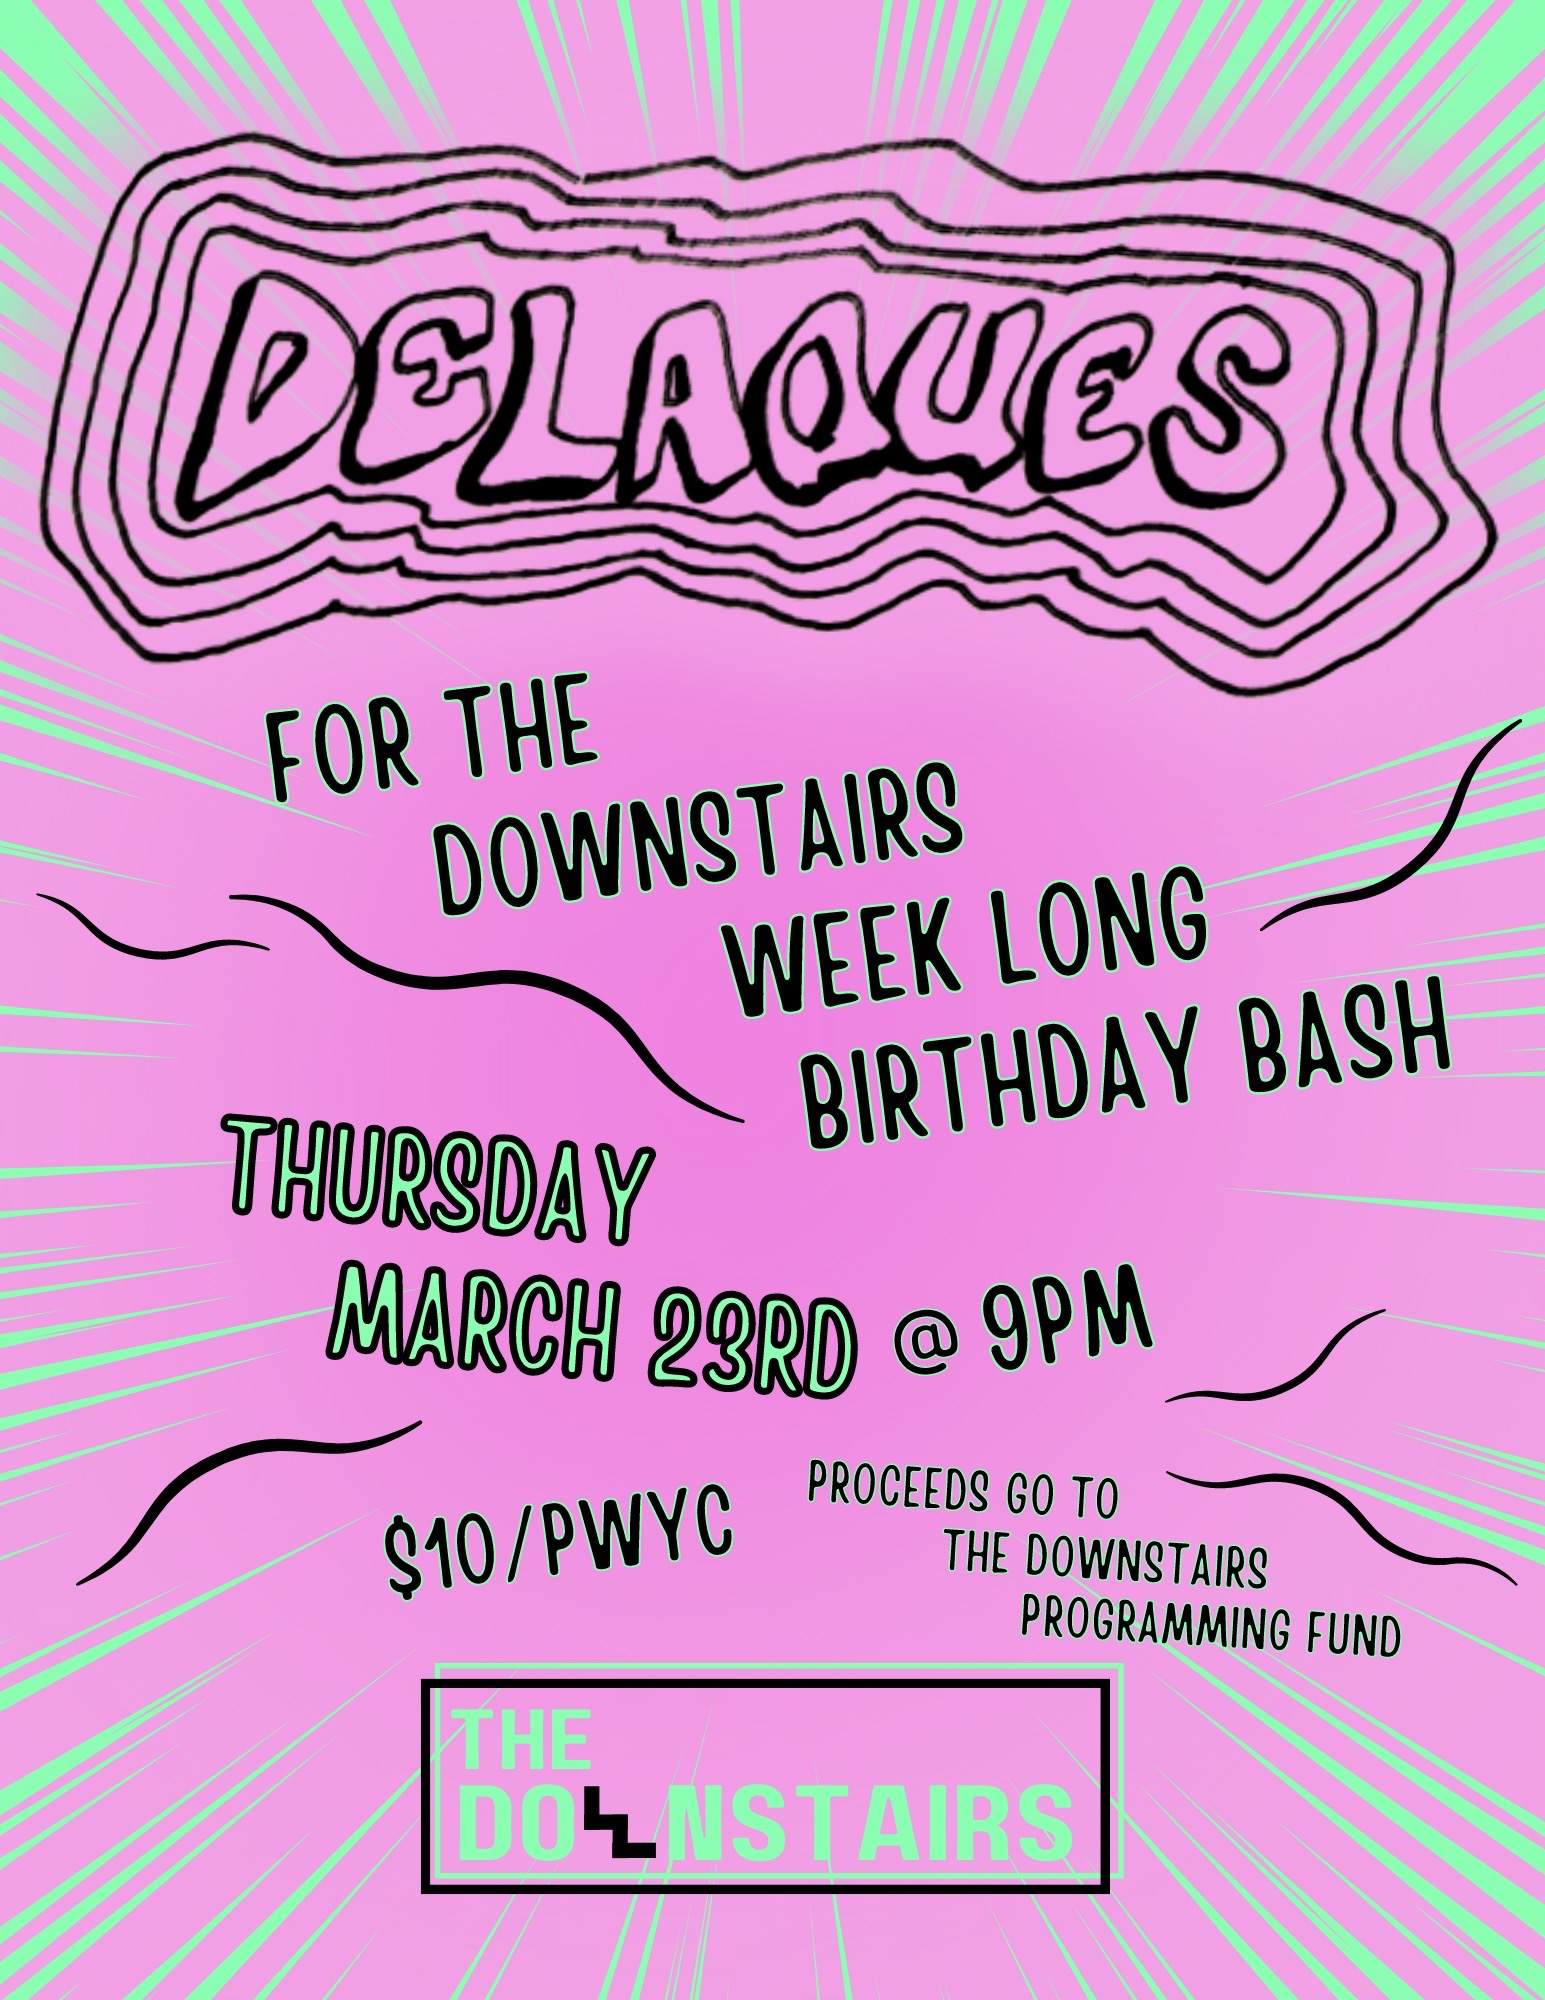 Delaques for Downstairs Birthday Bash